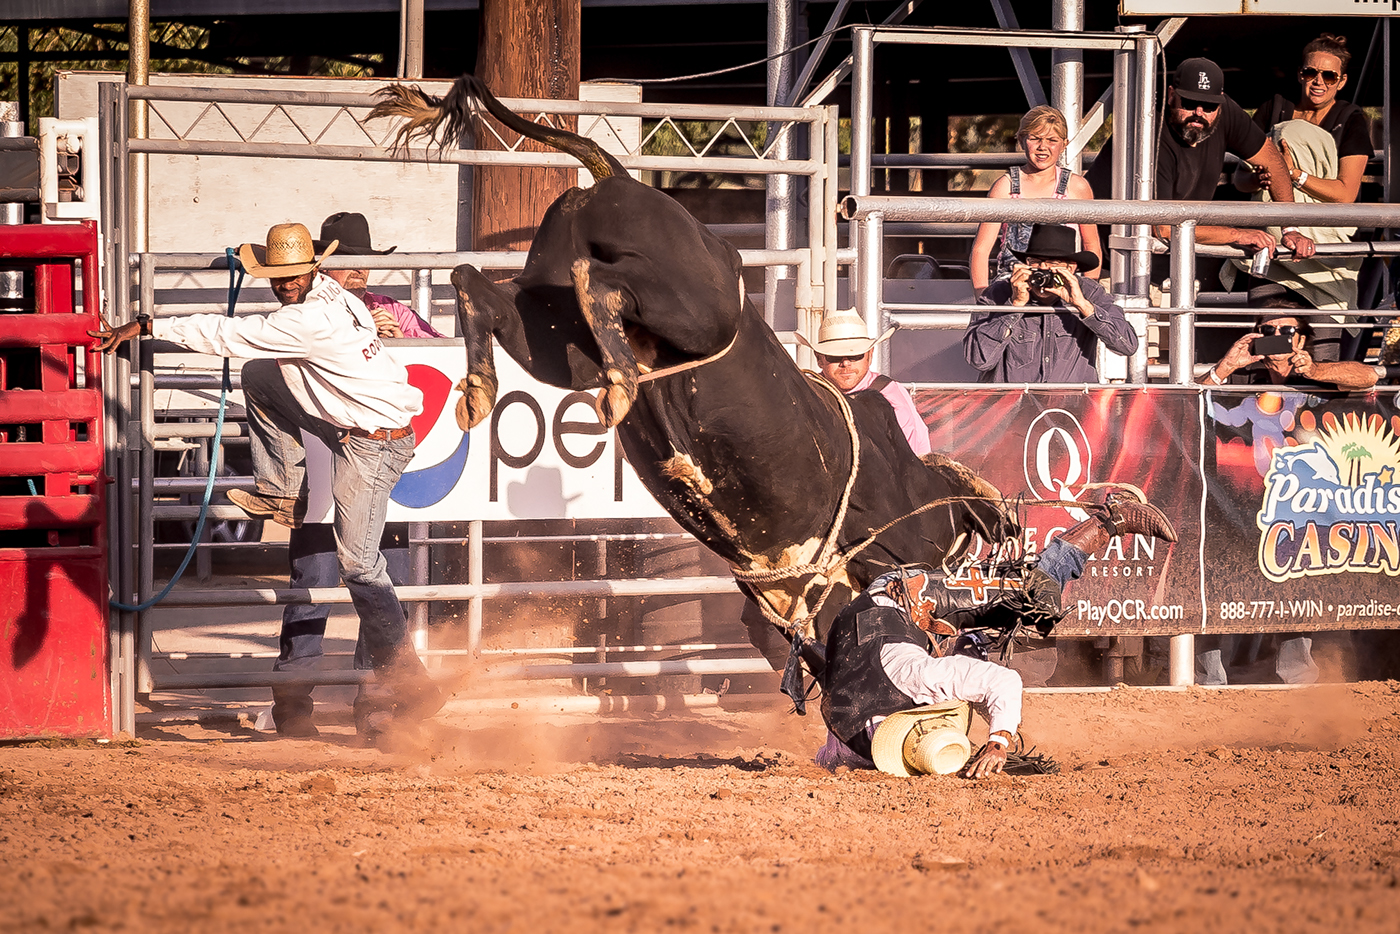 rodeo bull horses bullriding Competition farm country rural crowd animals Cattle equine California cowboy cowgirl